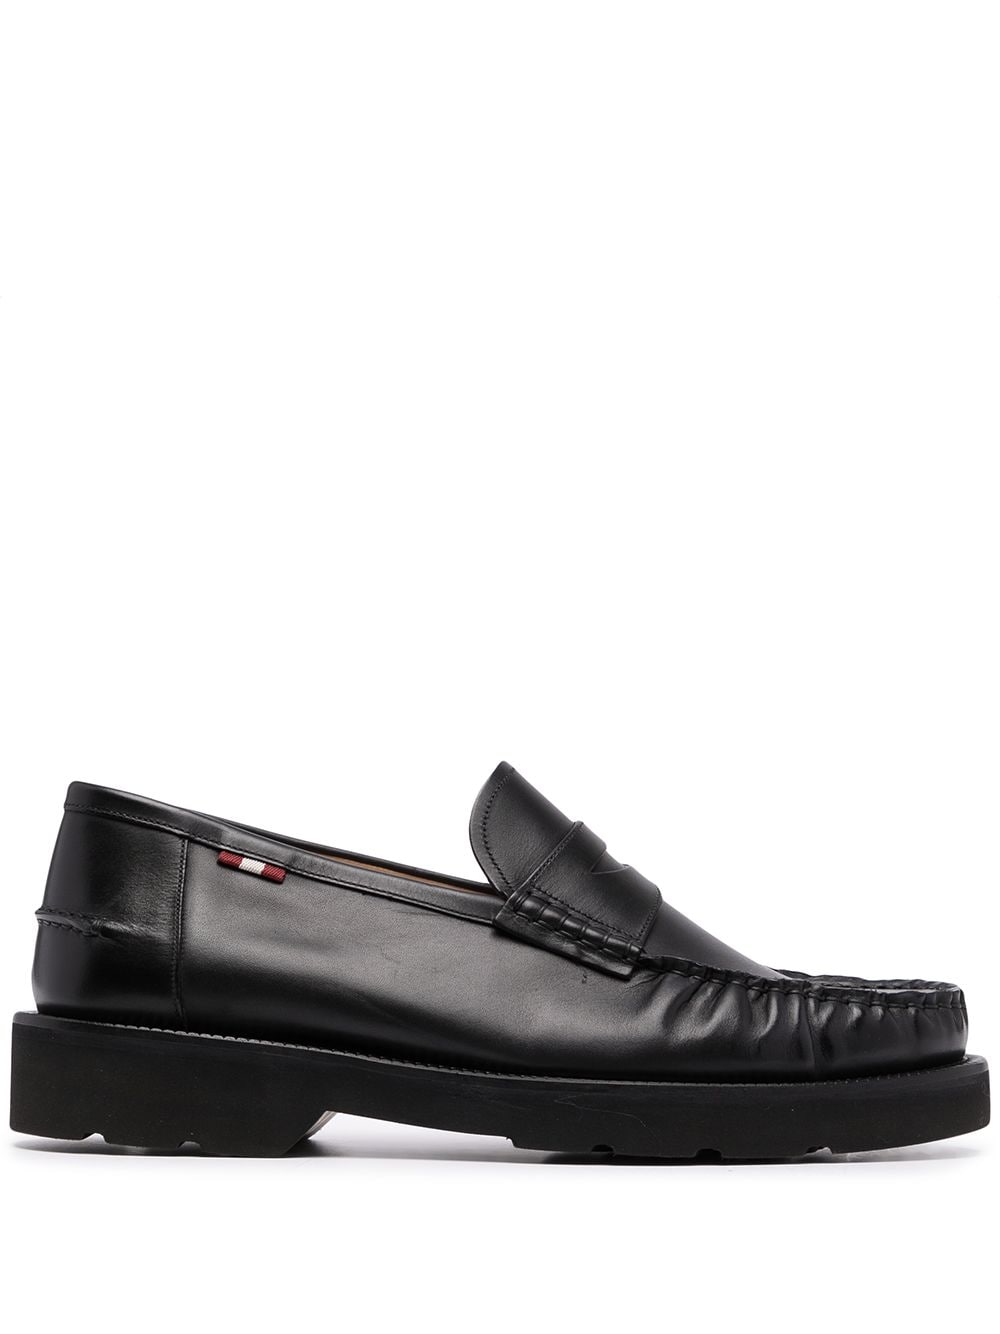 BALLY NOAH LEATHER LOAFERS